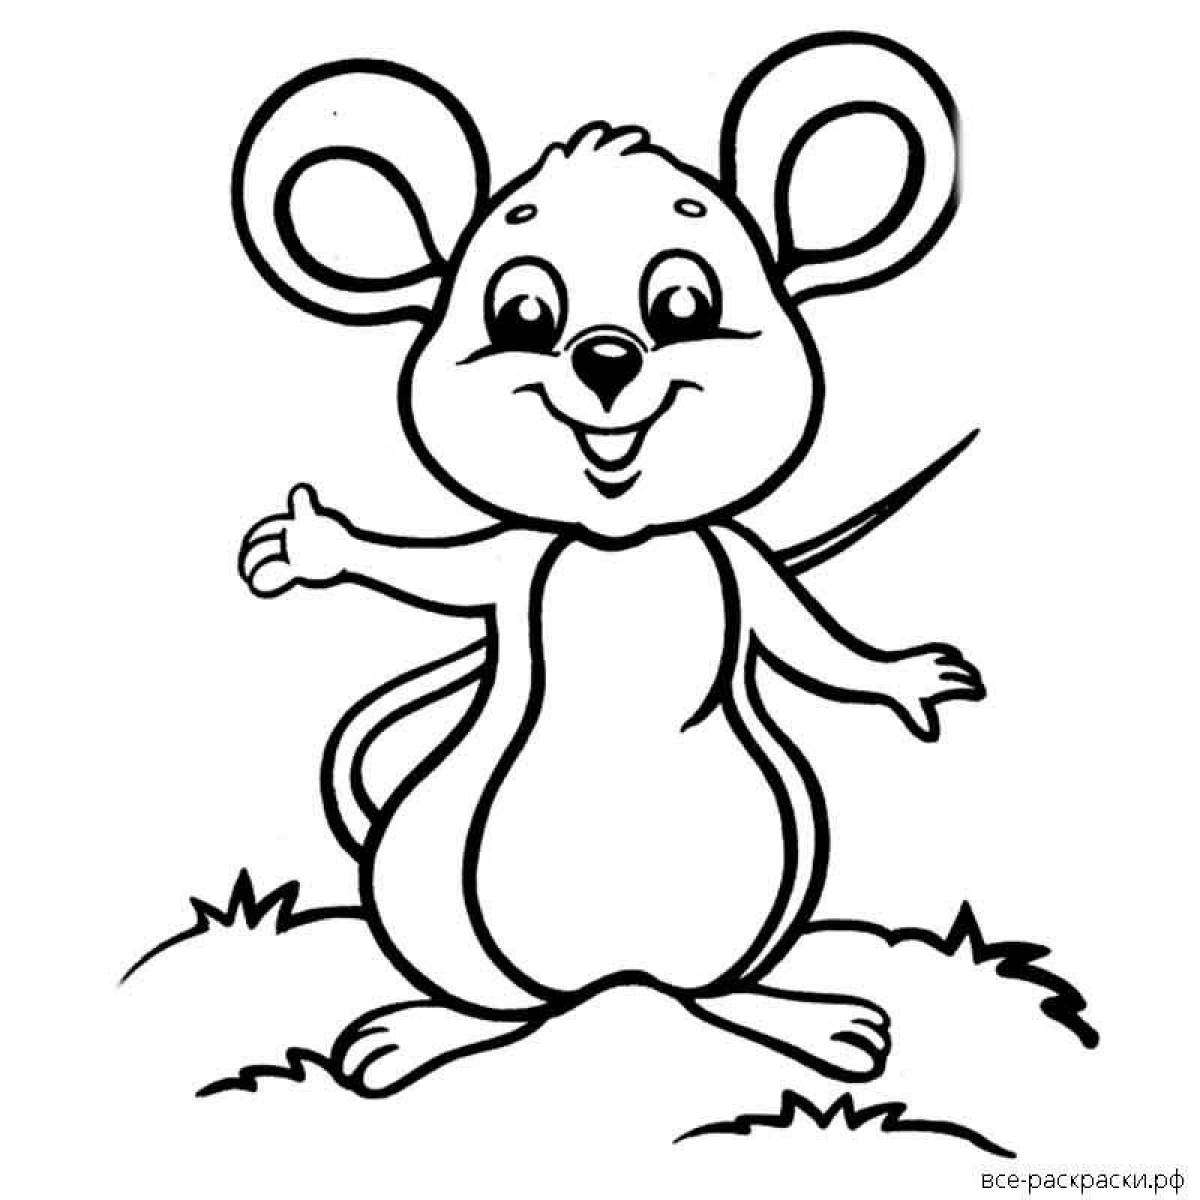 Amazing mouse coloring page for kids